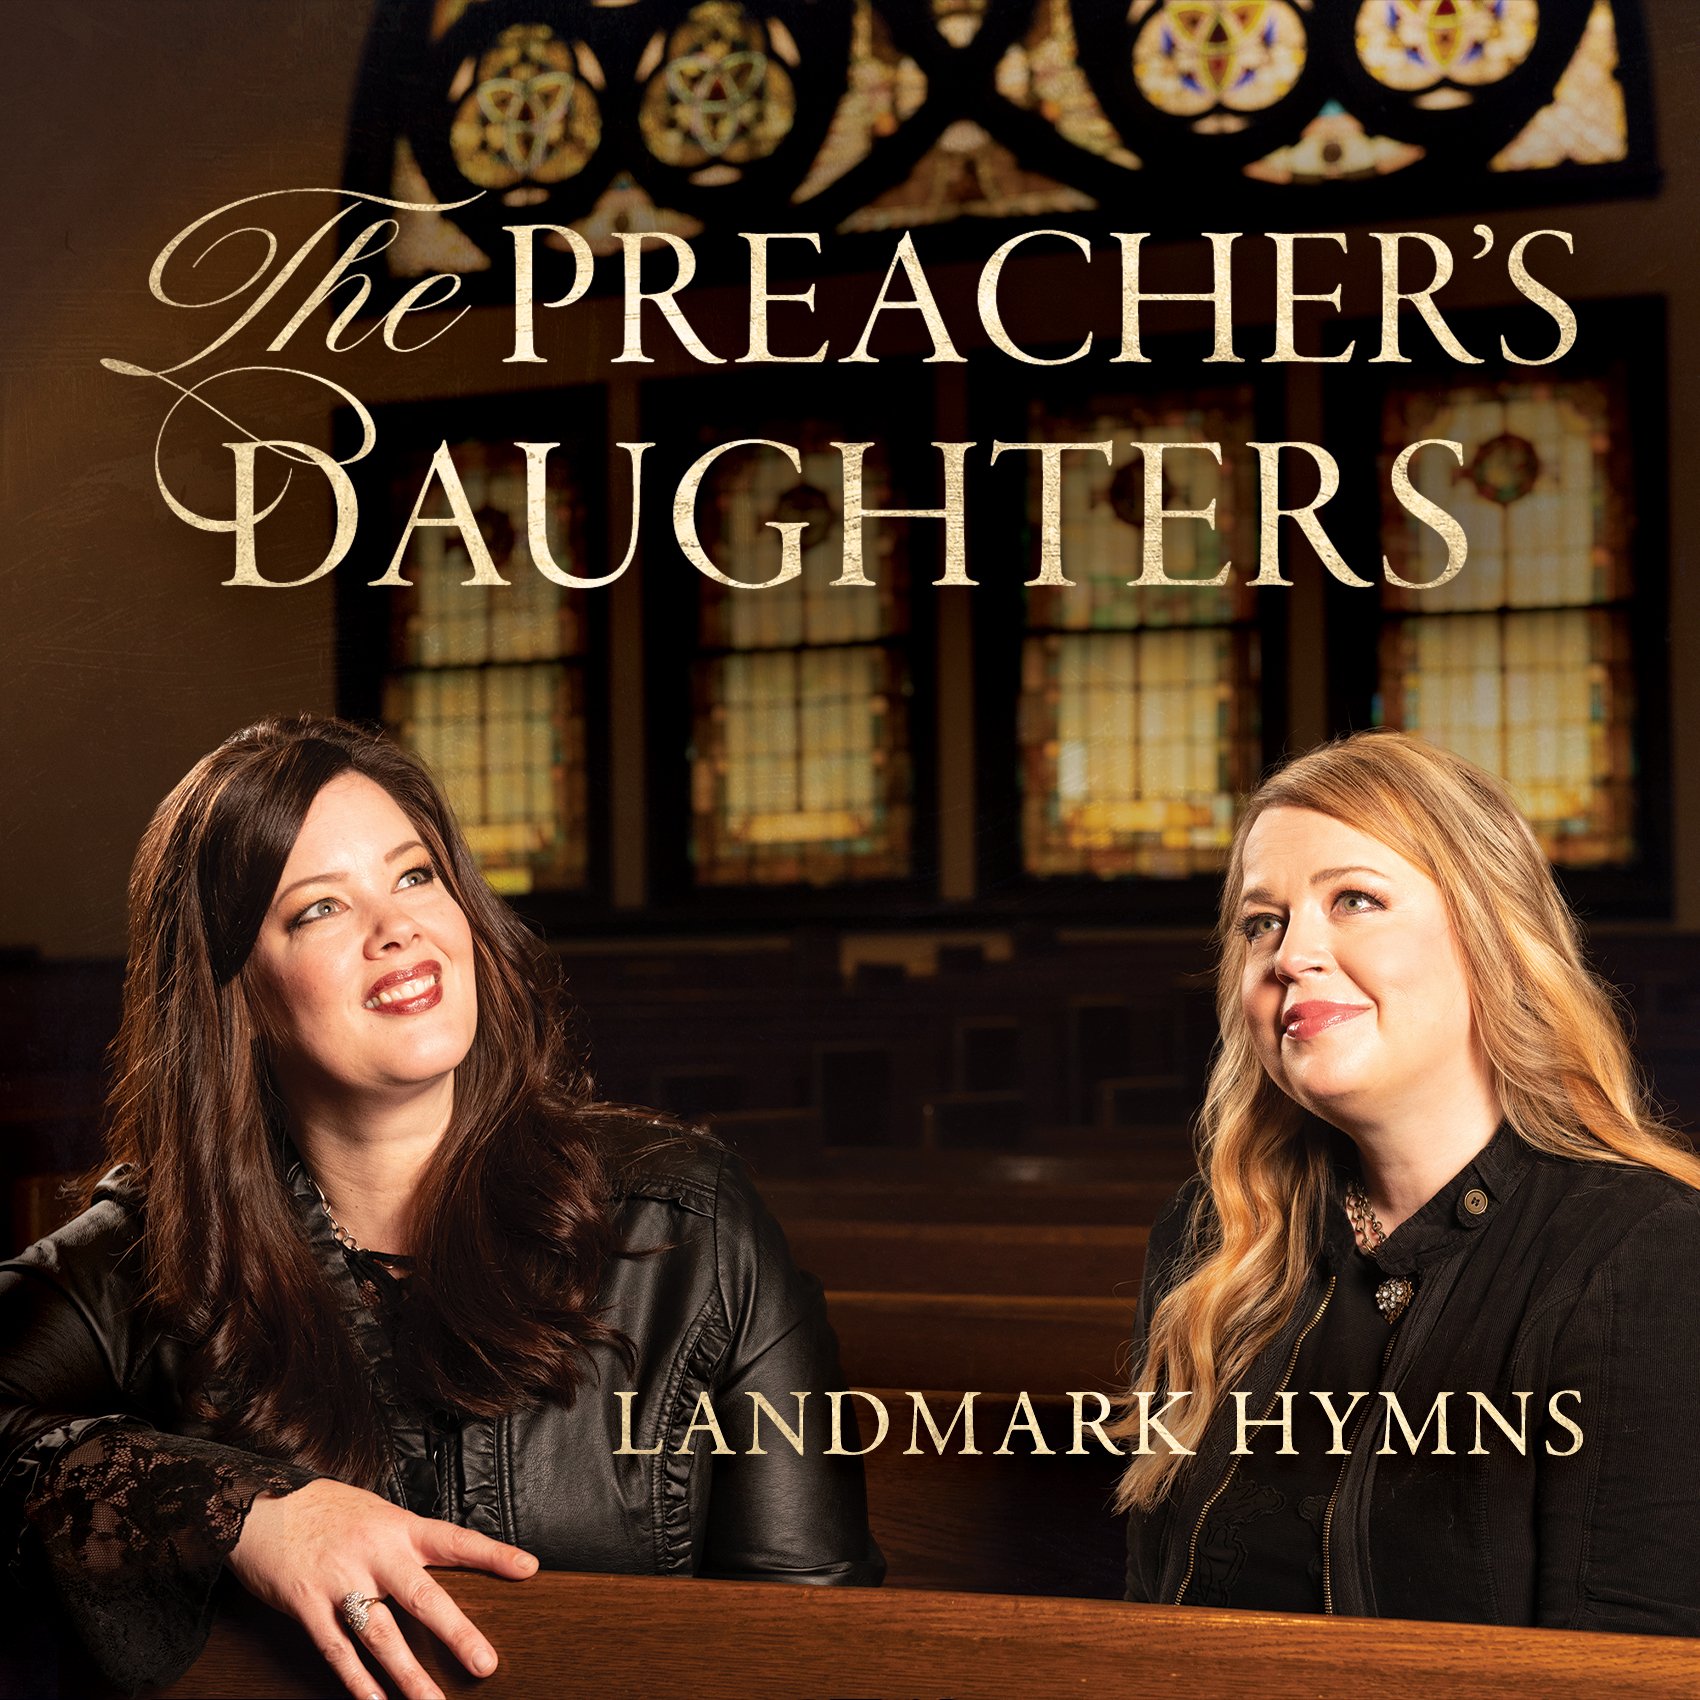 The Preacher's Daughters